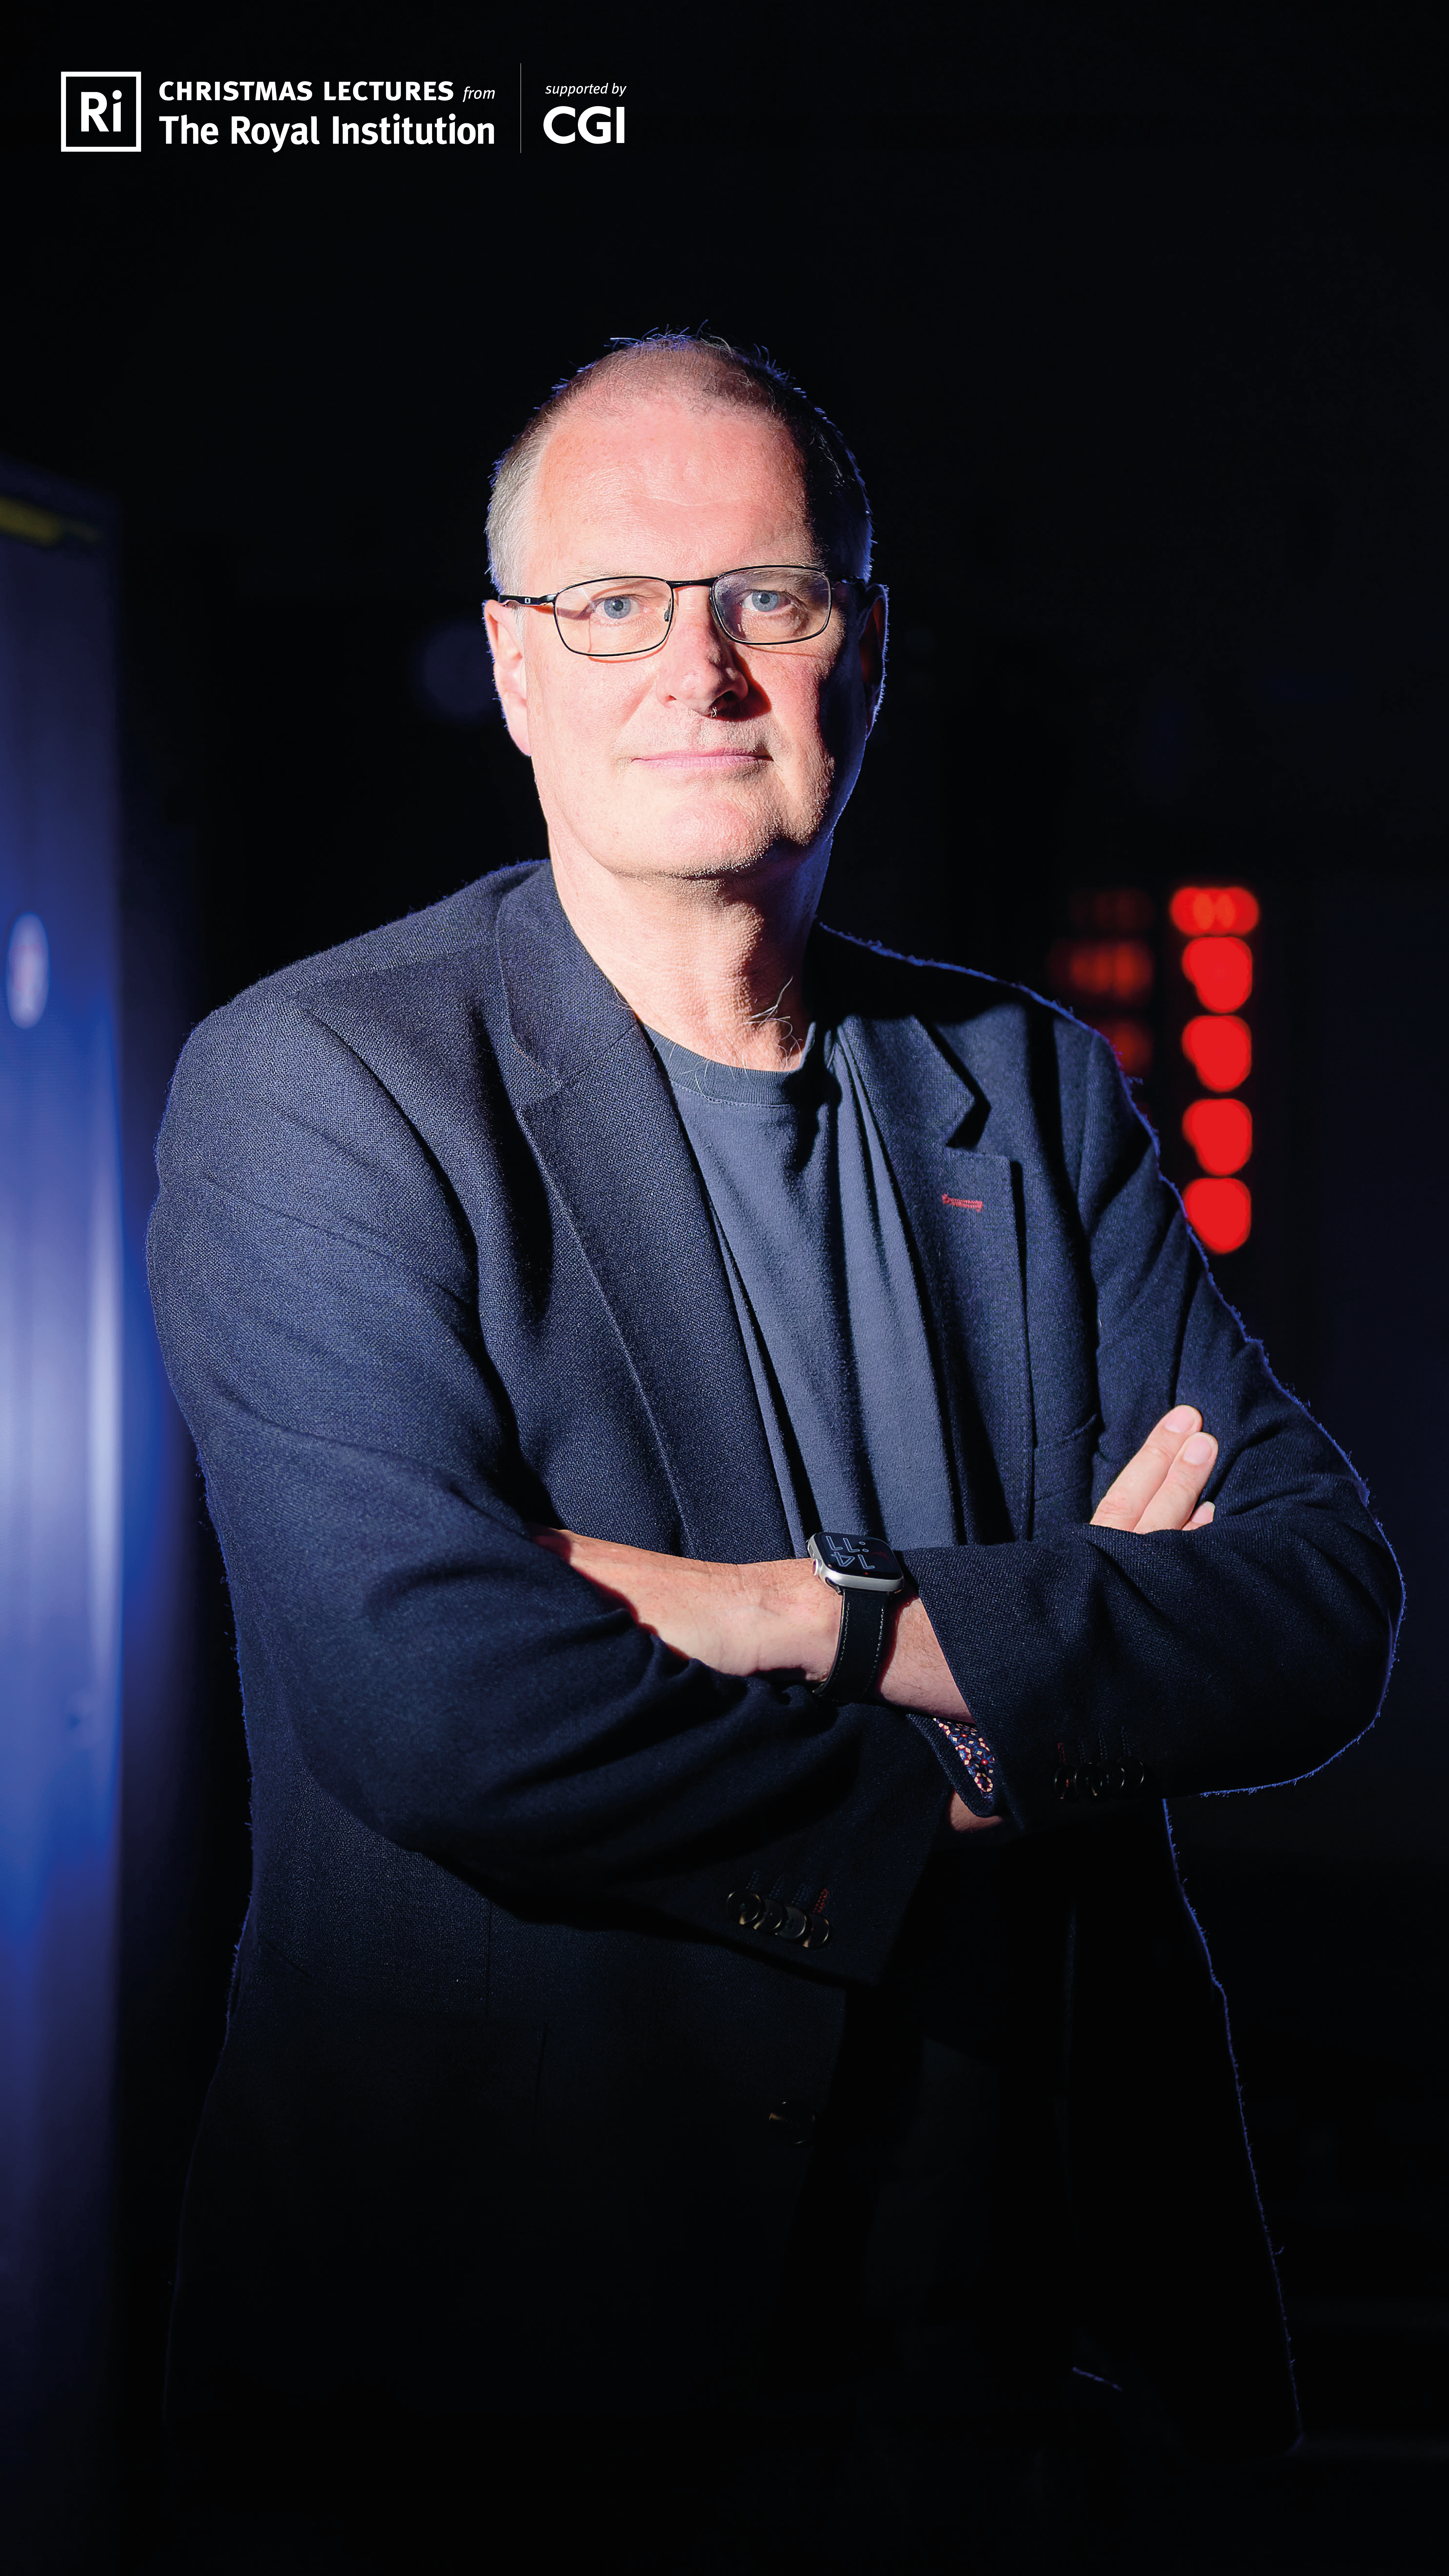 A picture of Mike Woolridge standing in front of a dark background. He is dramatically lit from one side. There are blue and red lights in the background.